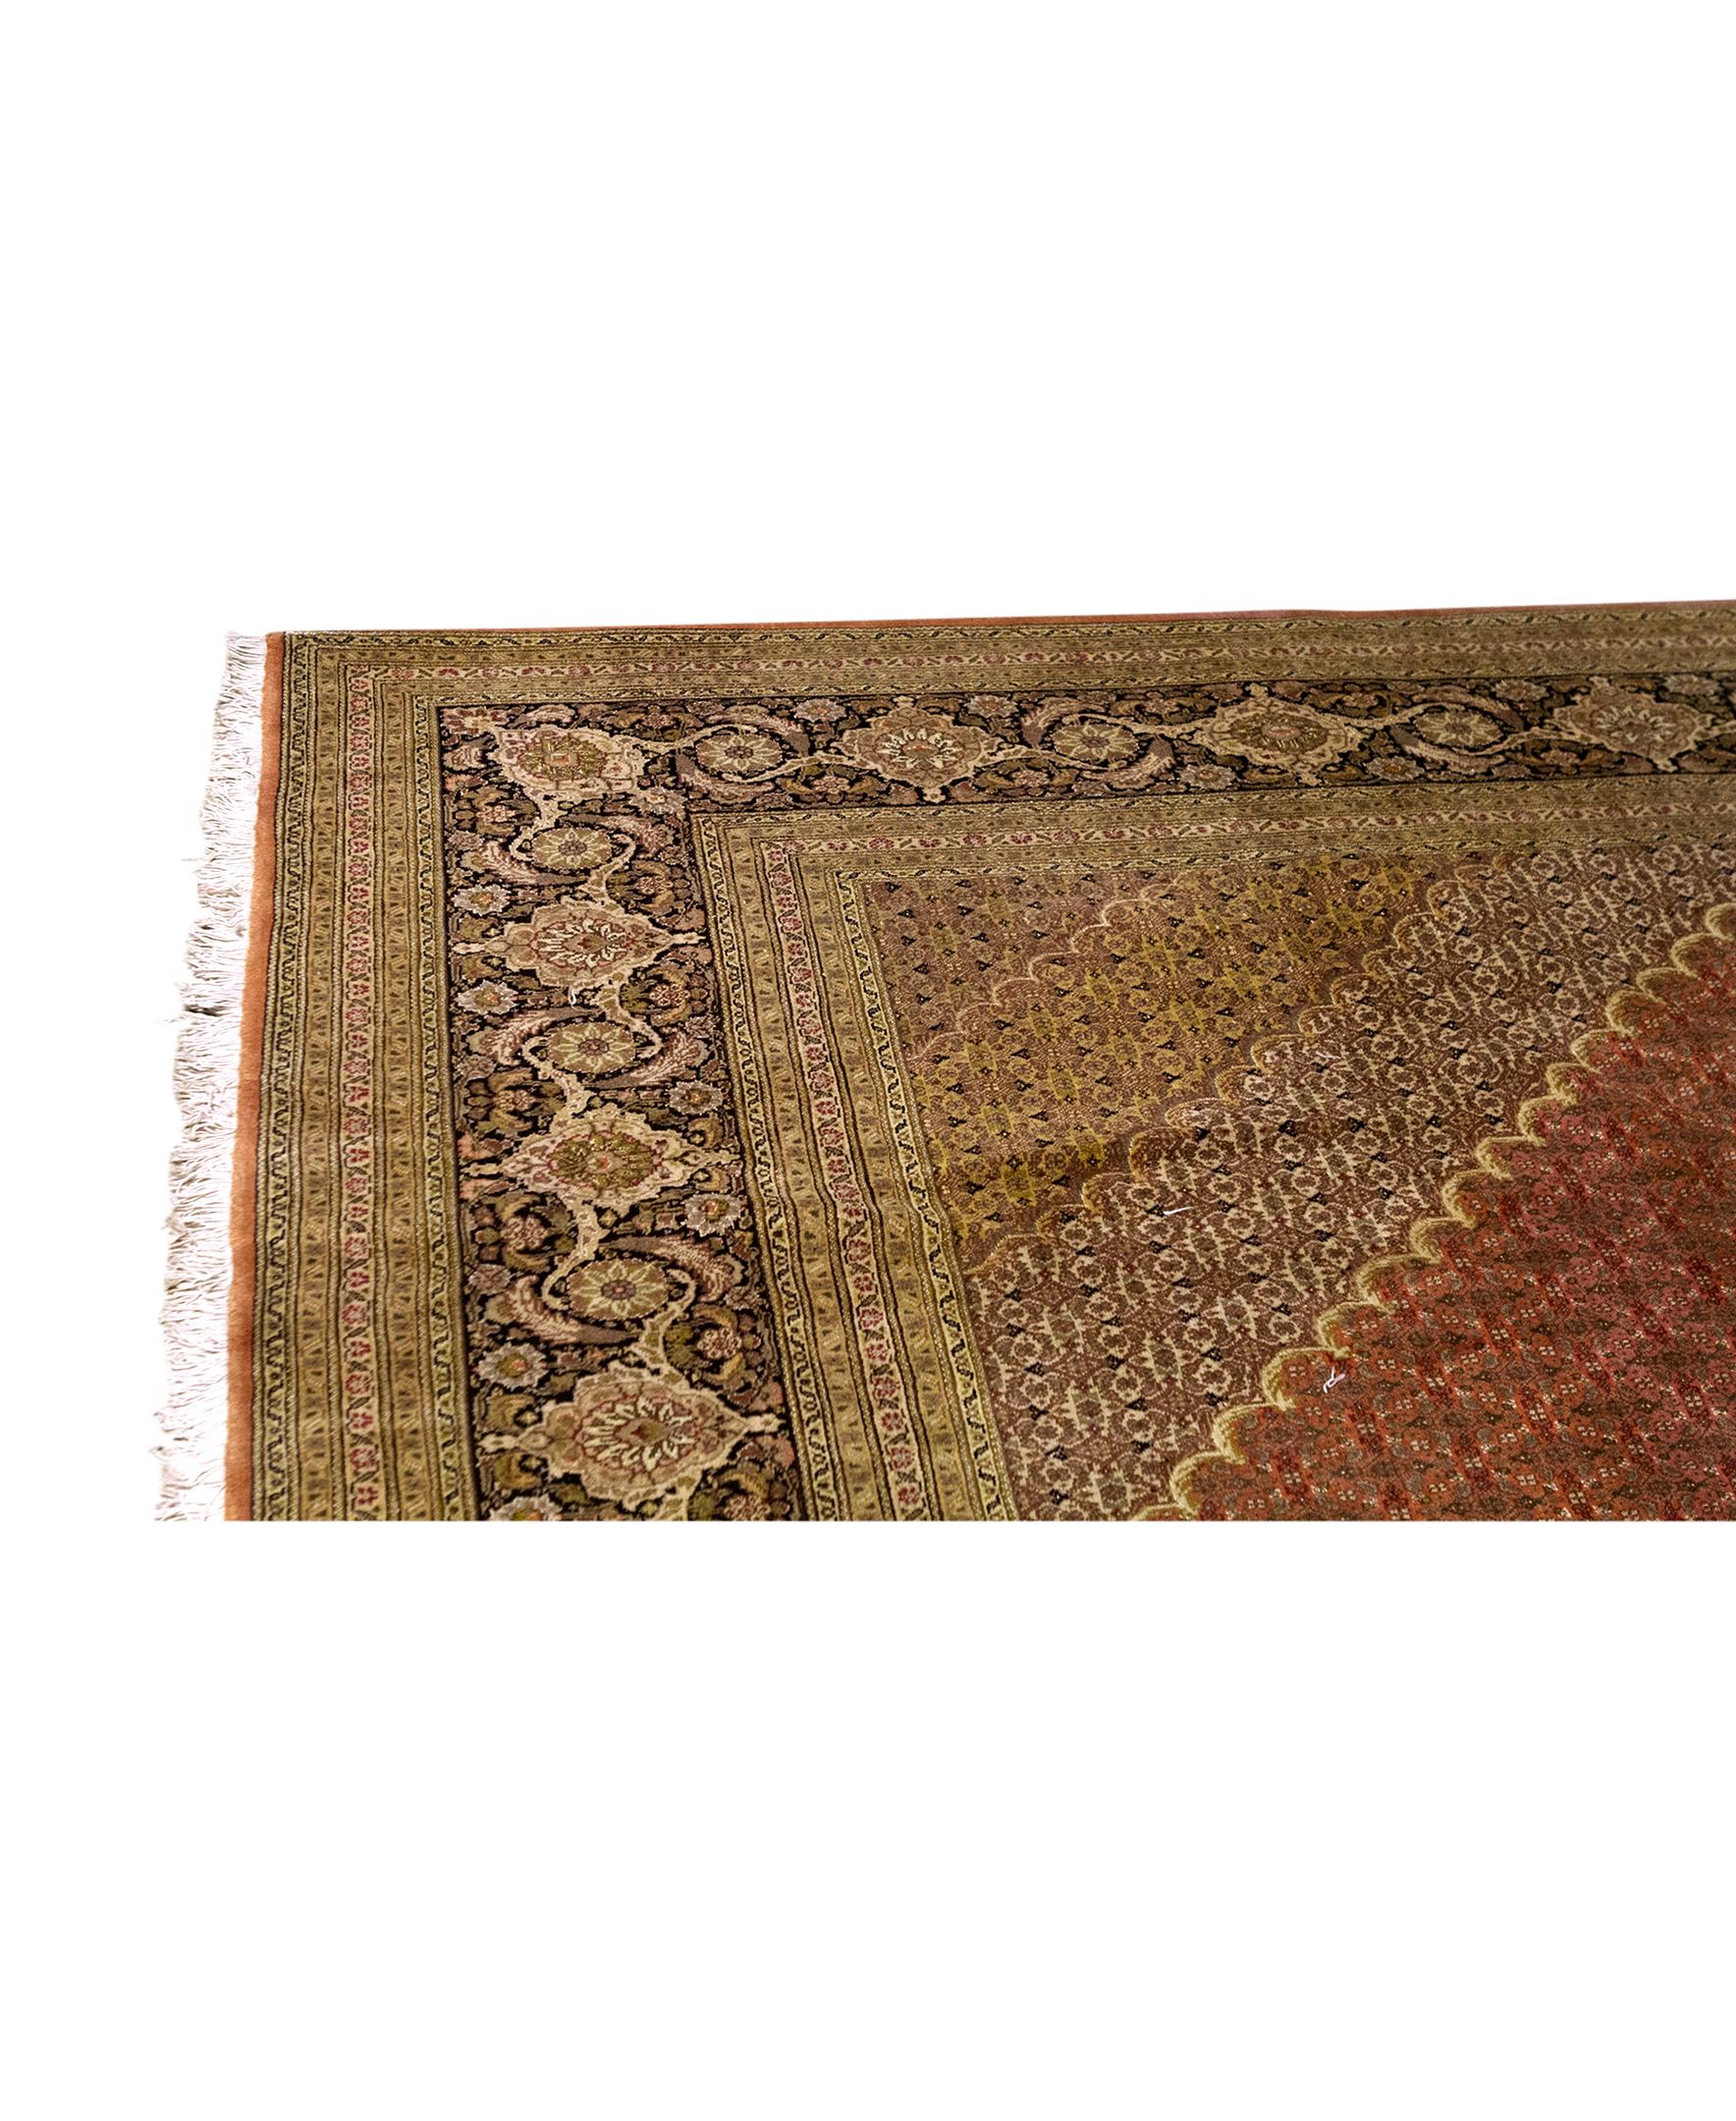   Antique Persian Fine Traditional Handwoven Luxury Wool Rust / Brown Rug. Size: 9'-11